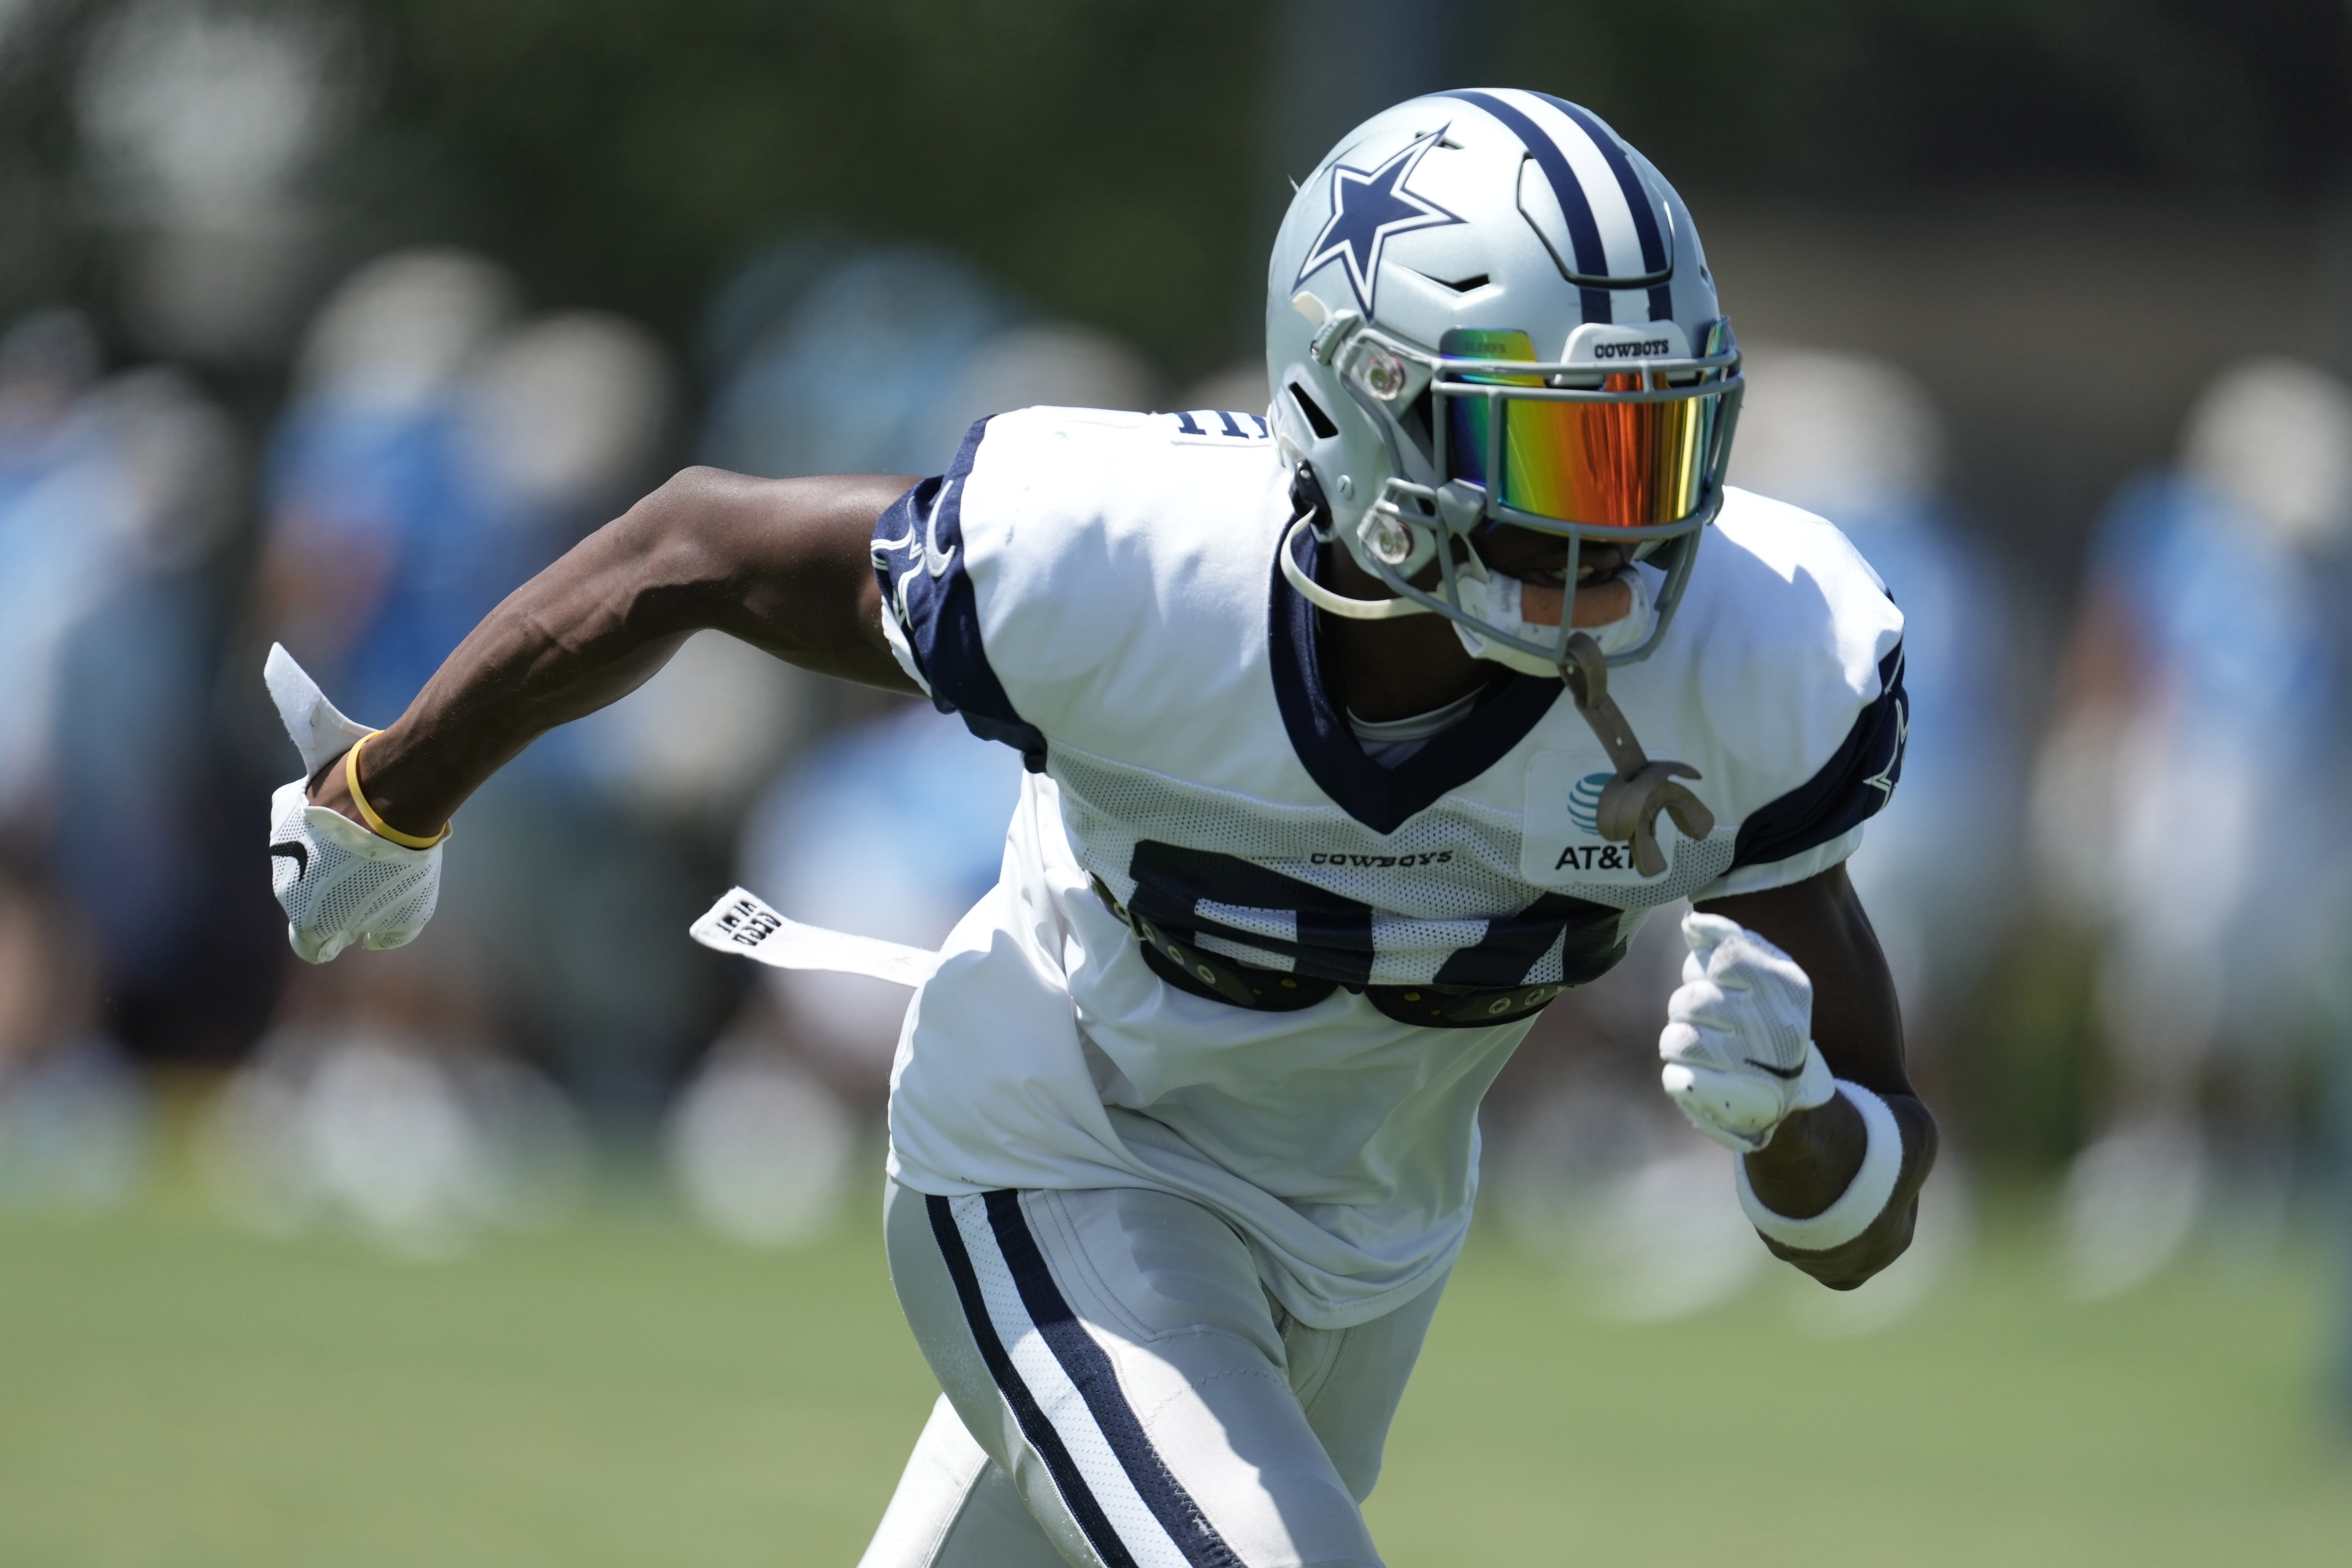 WATCH: Cowboys safety Isreal Mukuamu stops Chargers drive with INT